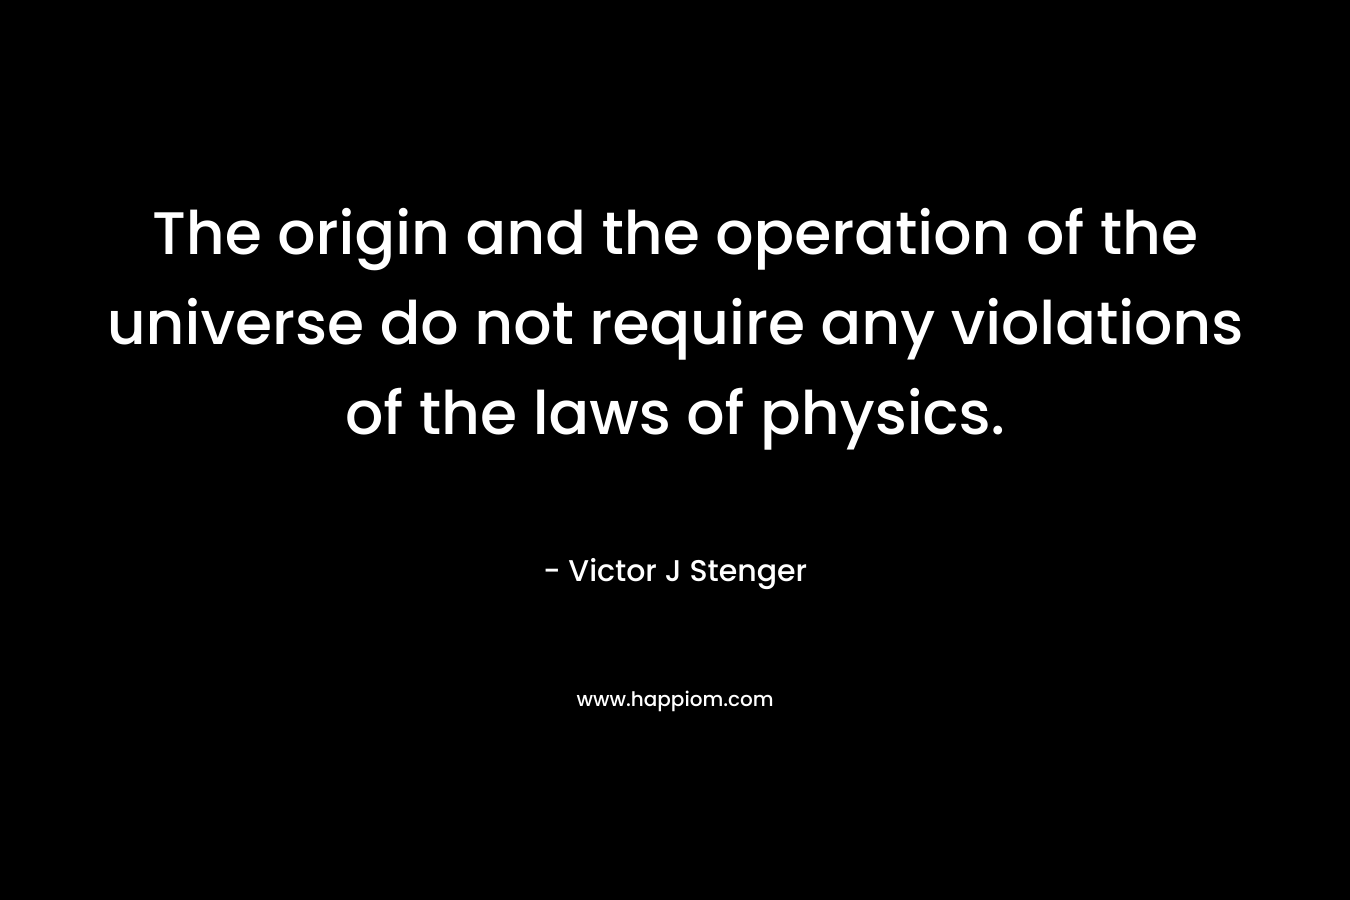 The origin and the operation of the universe do not require any violations of the laws of physics. – Victor J Stenger